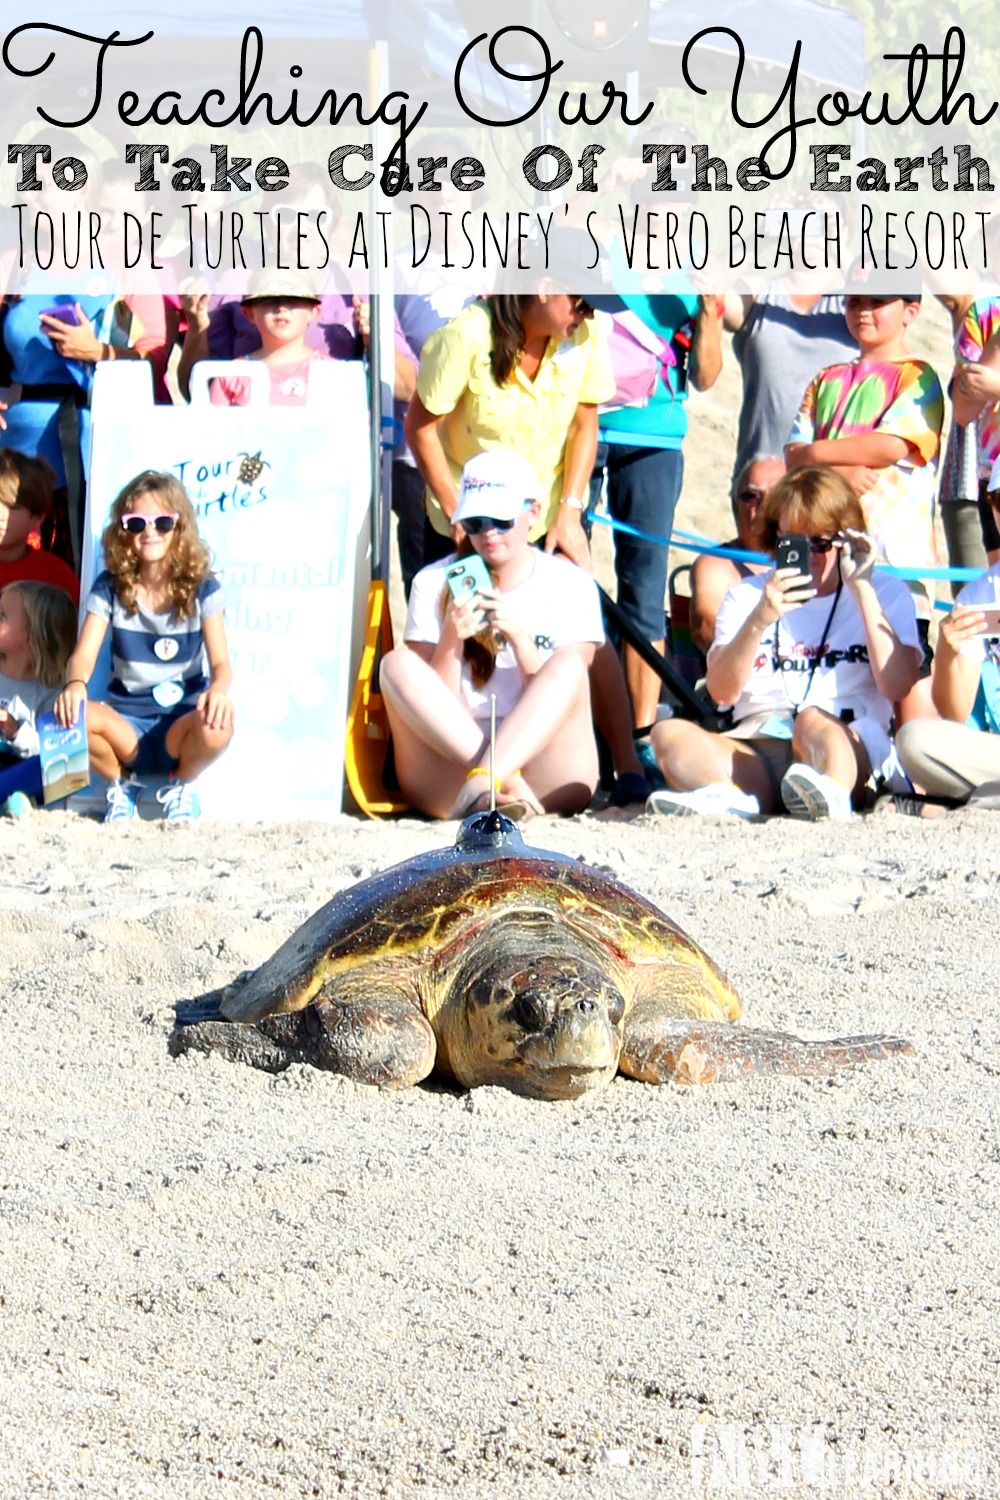 Teaching Our Youth To Take Care Of The Earth | Tour de Turtles at Disney's Vero Beach Resort -simplytodaylife.com